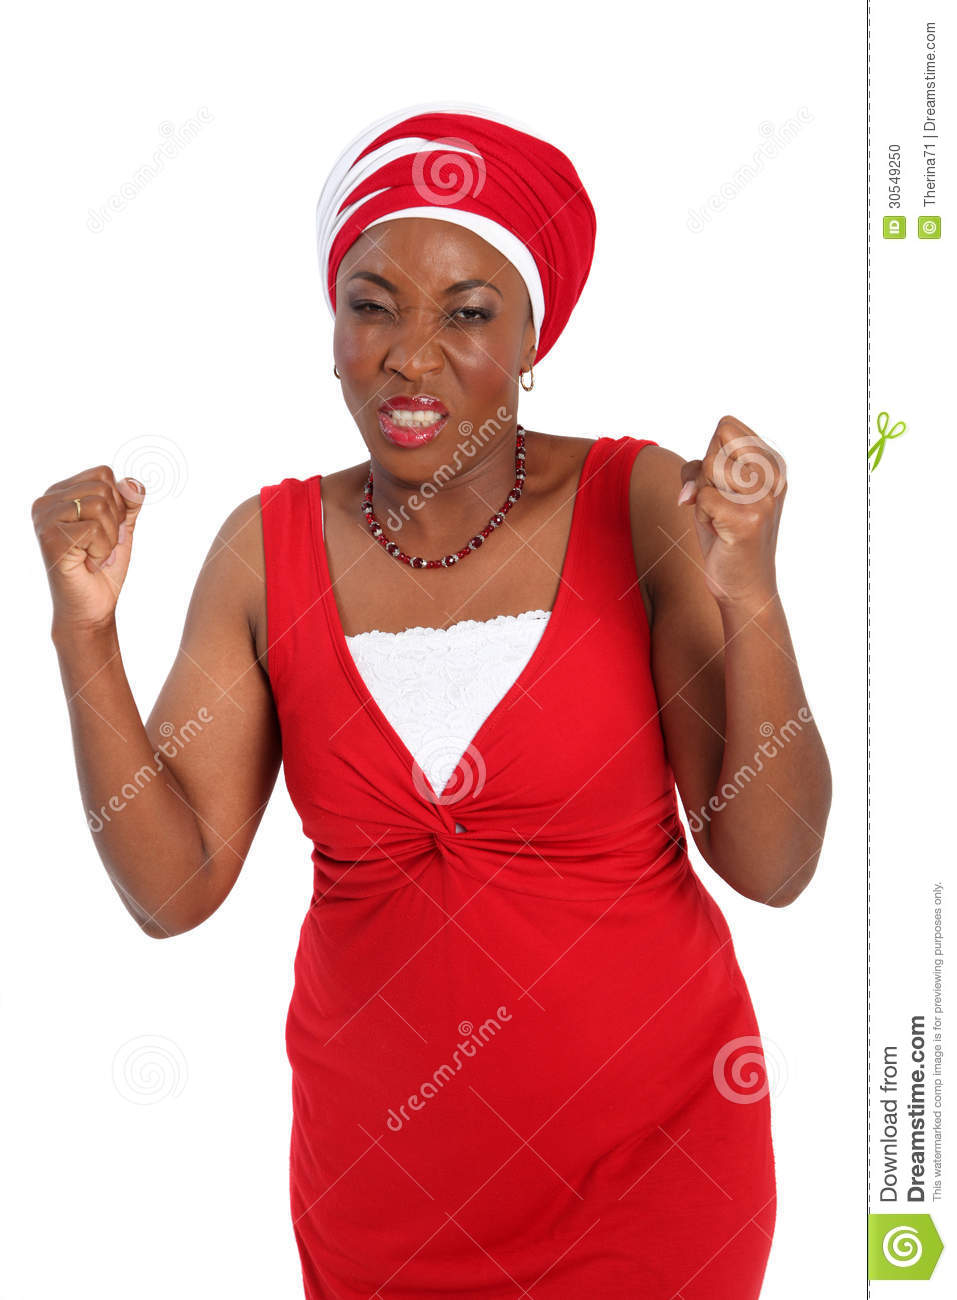 Frustratedafrican Woman Wearing A Red Dress And Fitting Headscarf